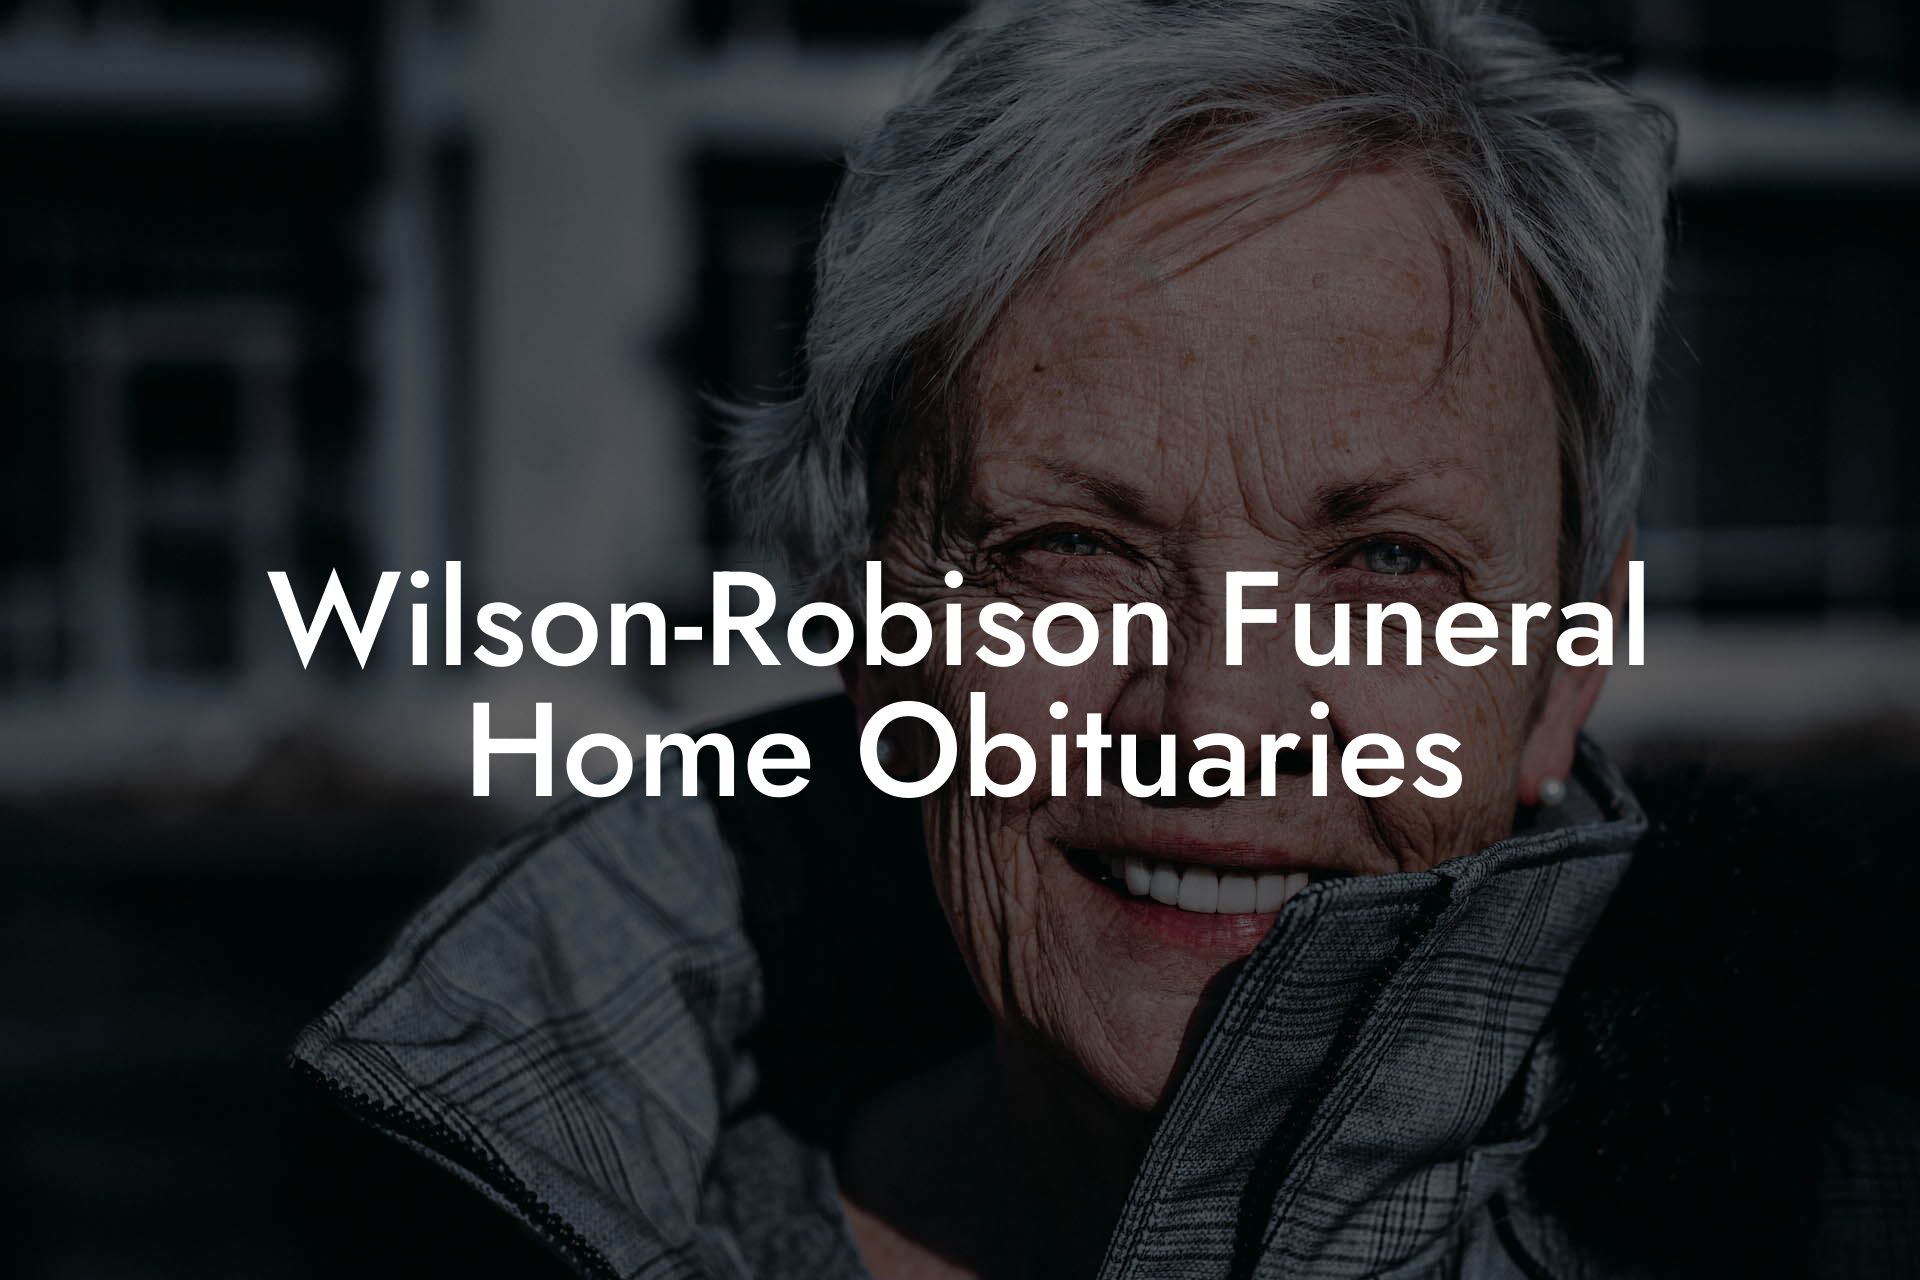 Wilson-Robison Funeral Home Obituaries